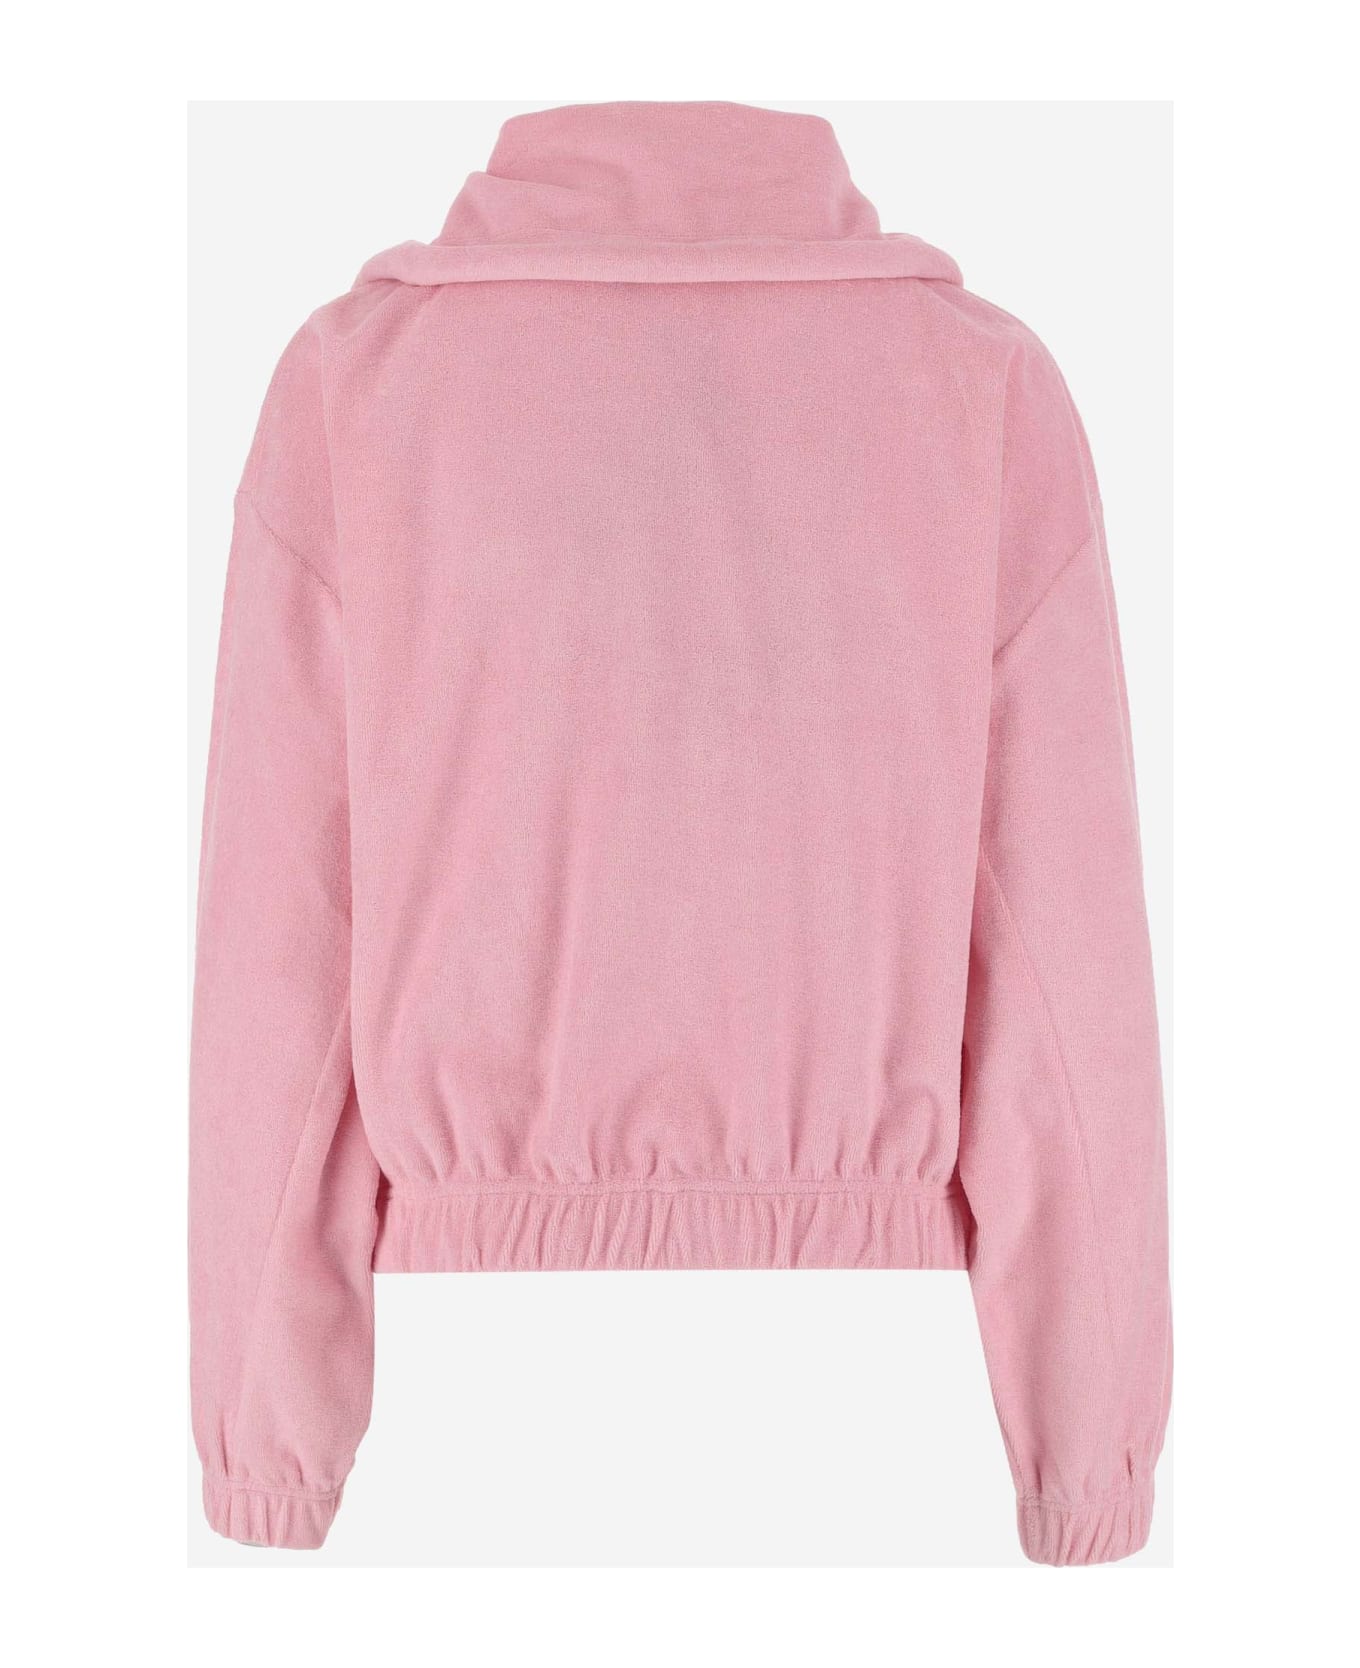 Patou Cotton Sweatshirt With Embossed Patou Signature - Pink フリース